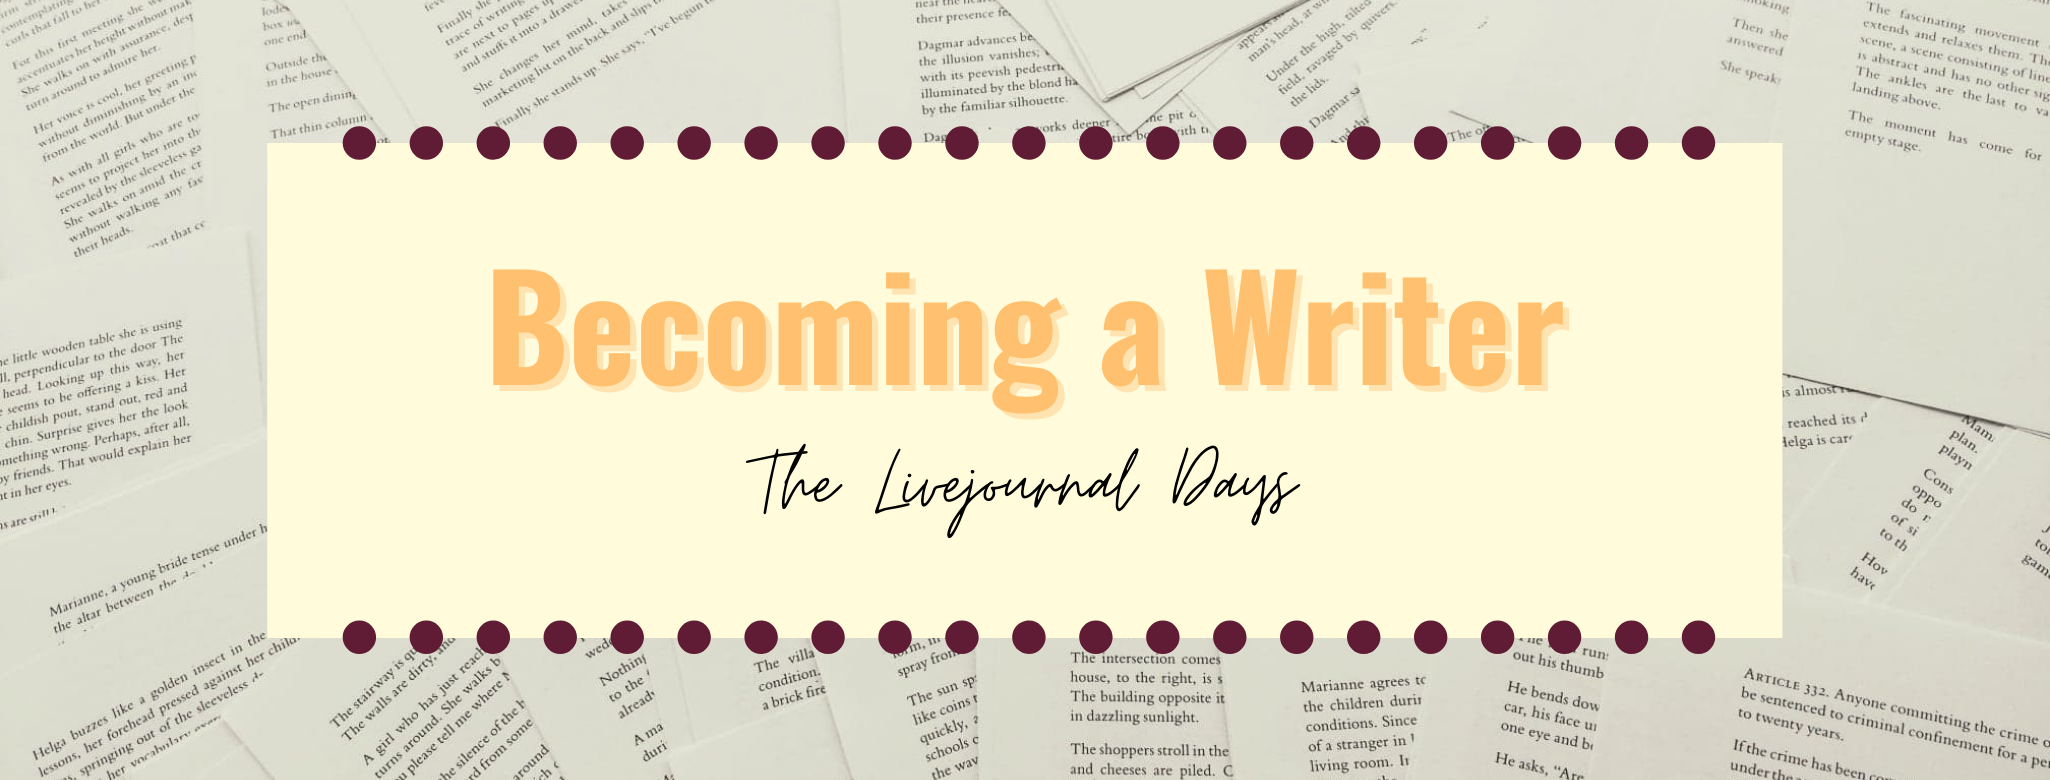 Becoming a writer banner